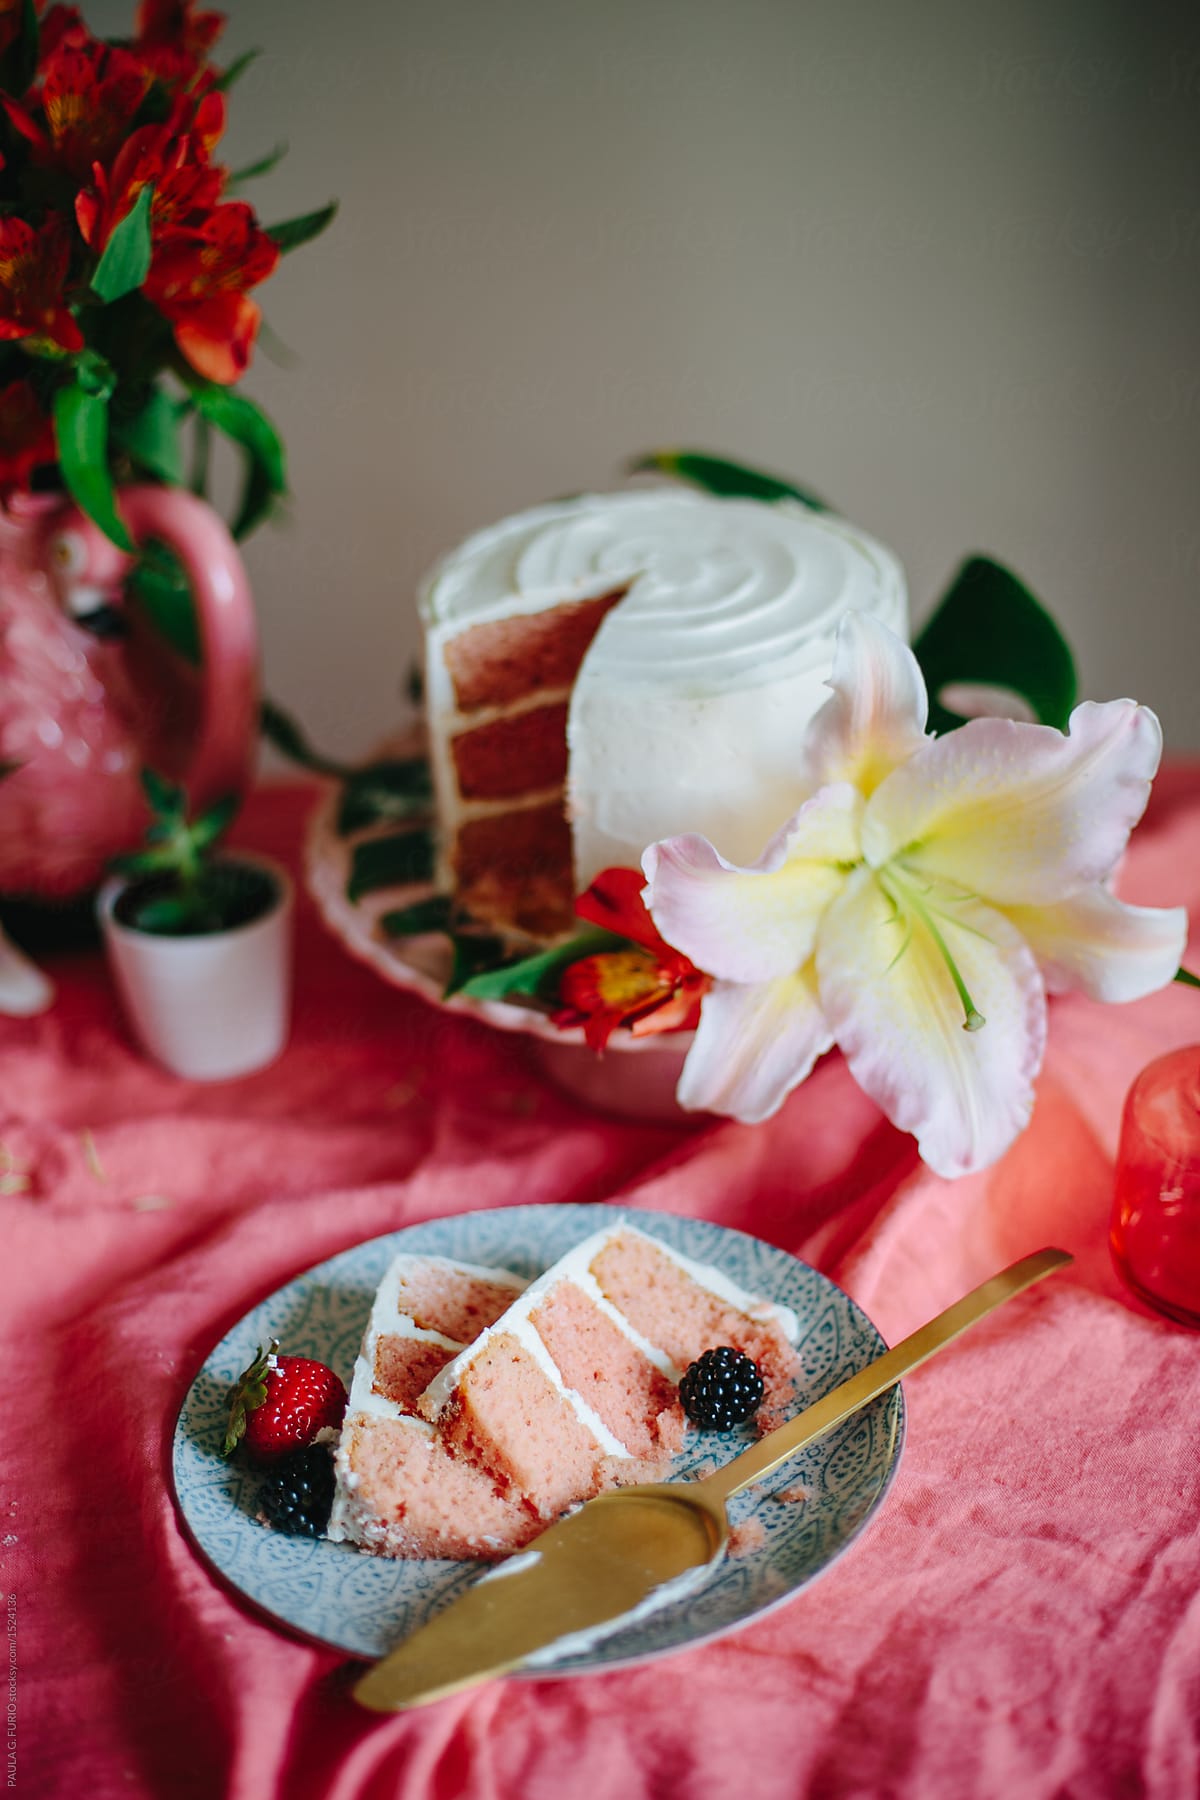 Pink cheesecake with fruits and flowers